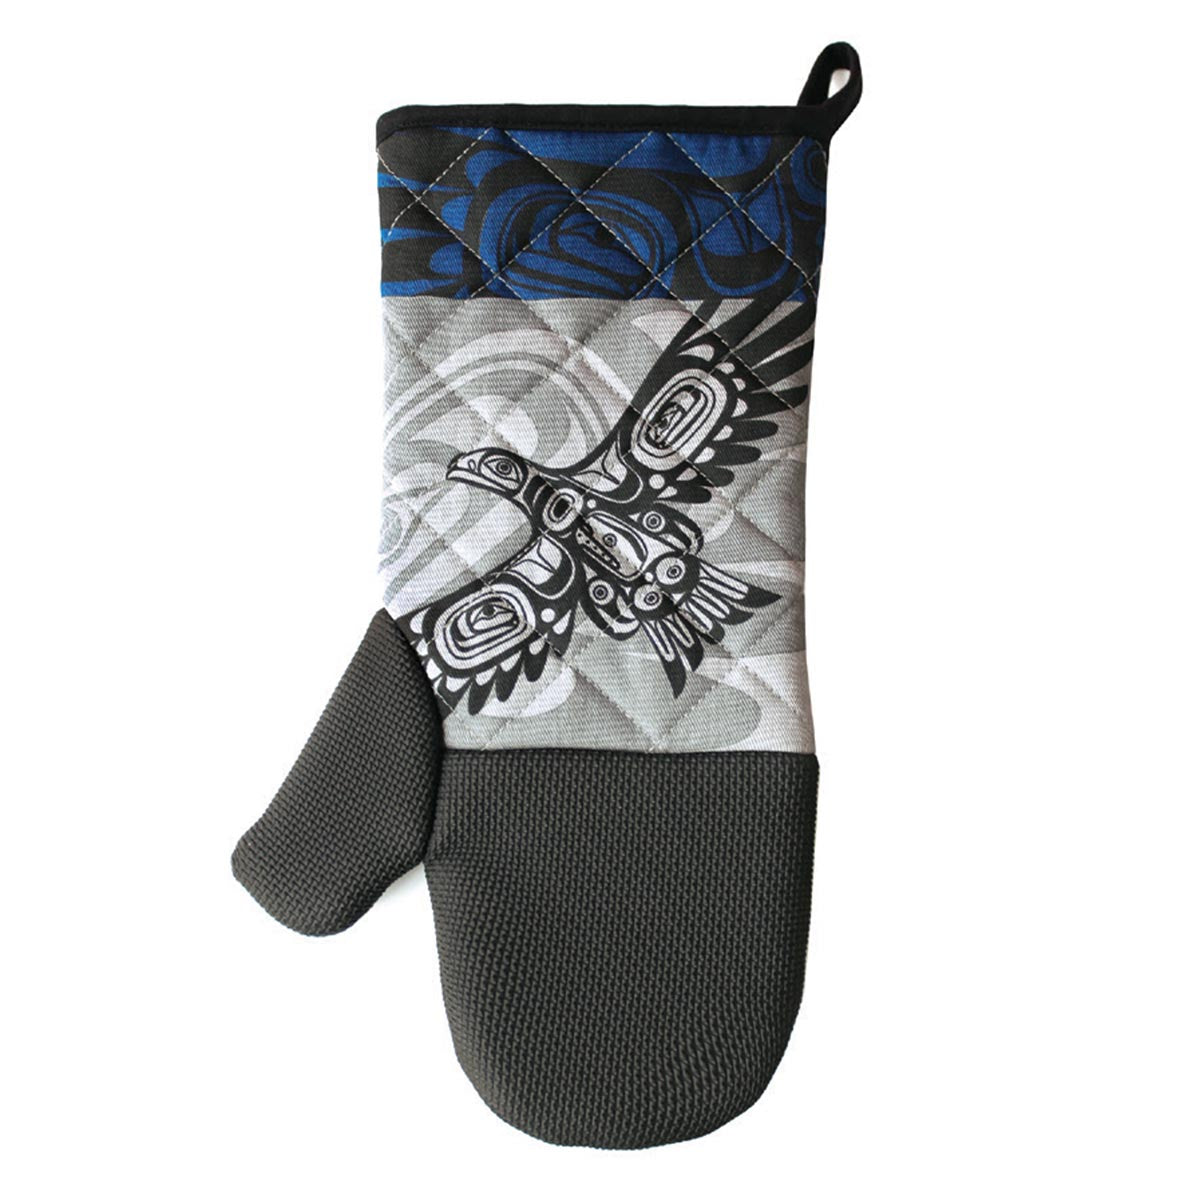 OVEN MITTS - Soaring Eagle - KOBSE - House of Himwitsa Native Art Gallery and Gifts